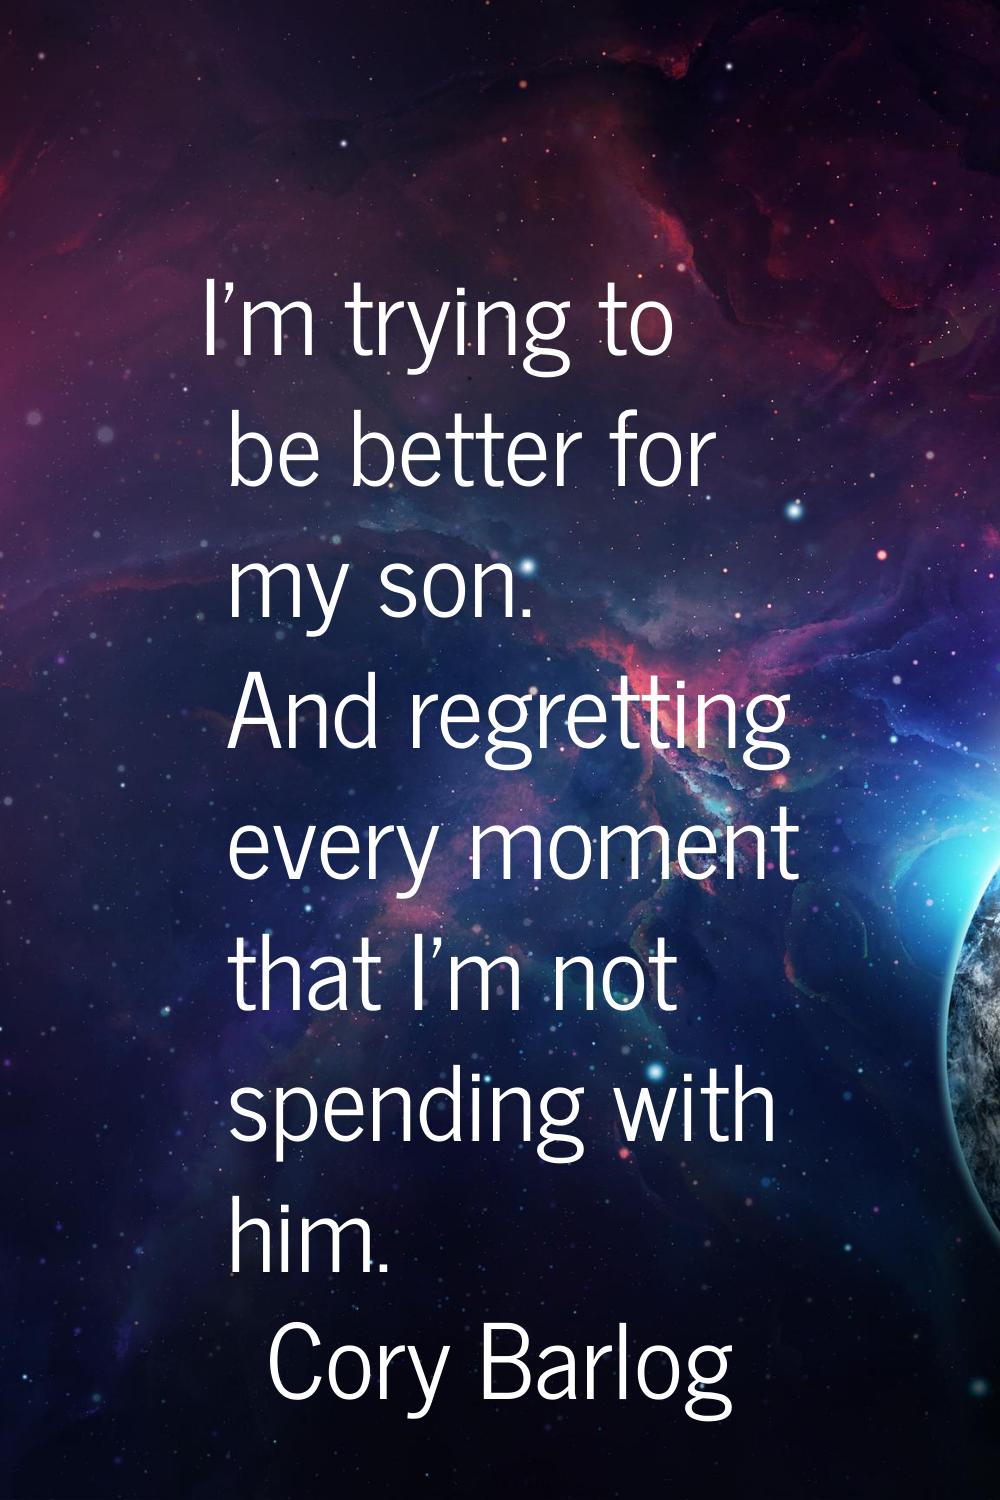 I'm trying to be better for my son. And regretting every moment that I'm not spending with him.